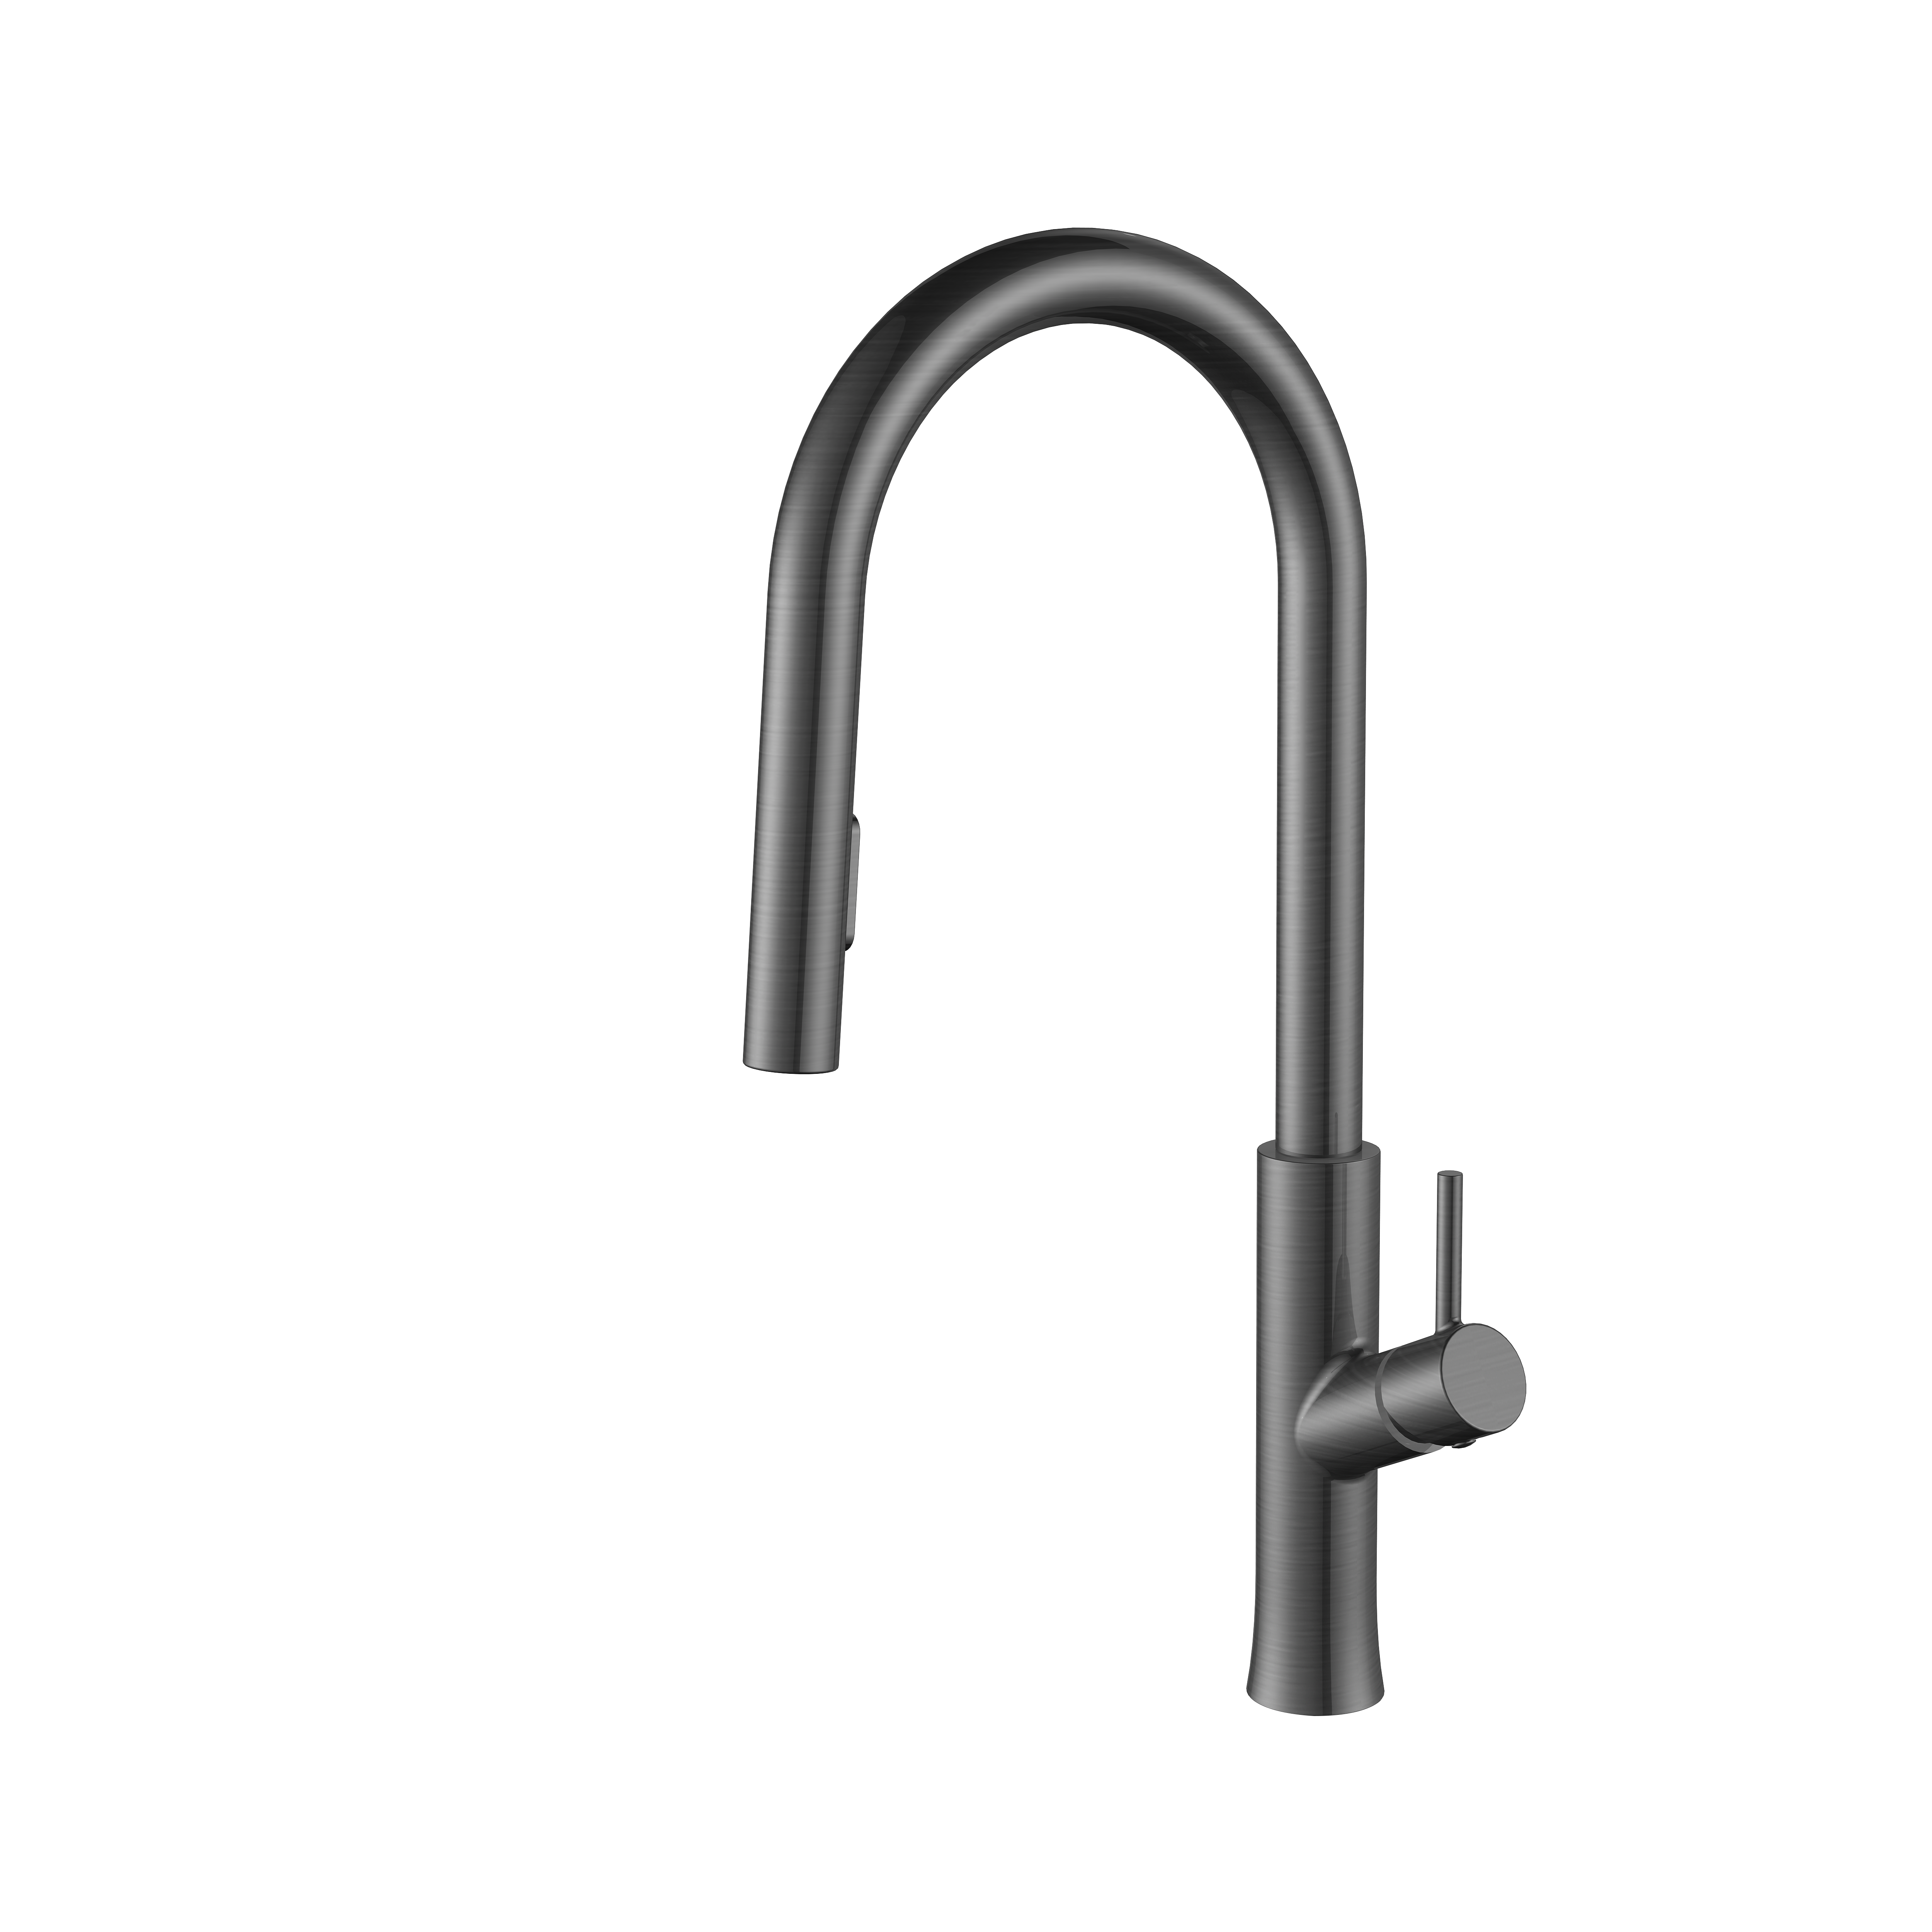 Terrific Single Handle Kitchen Faucet with Amazing Stangdard